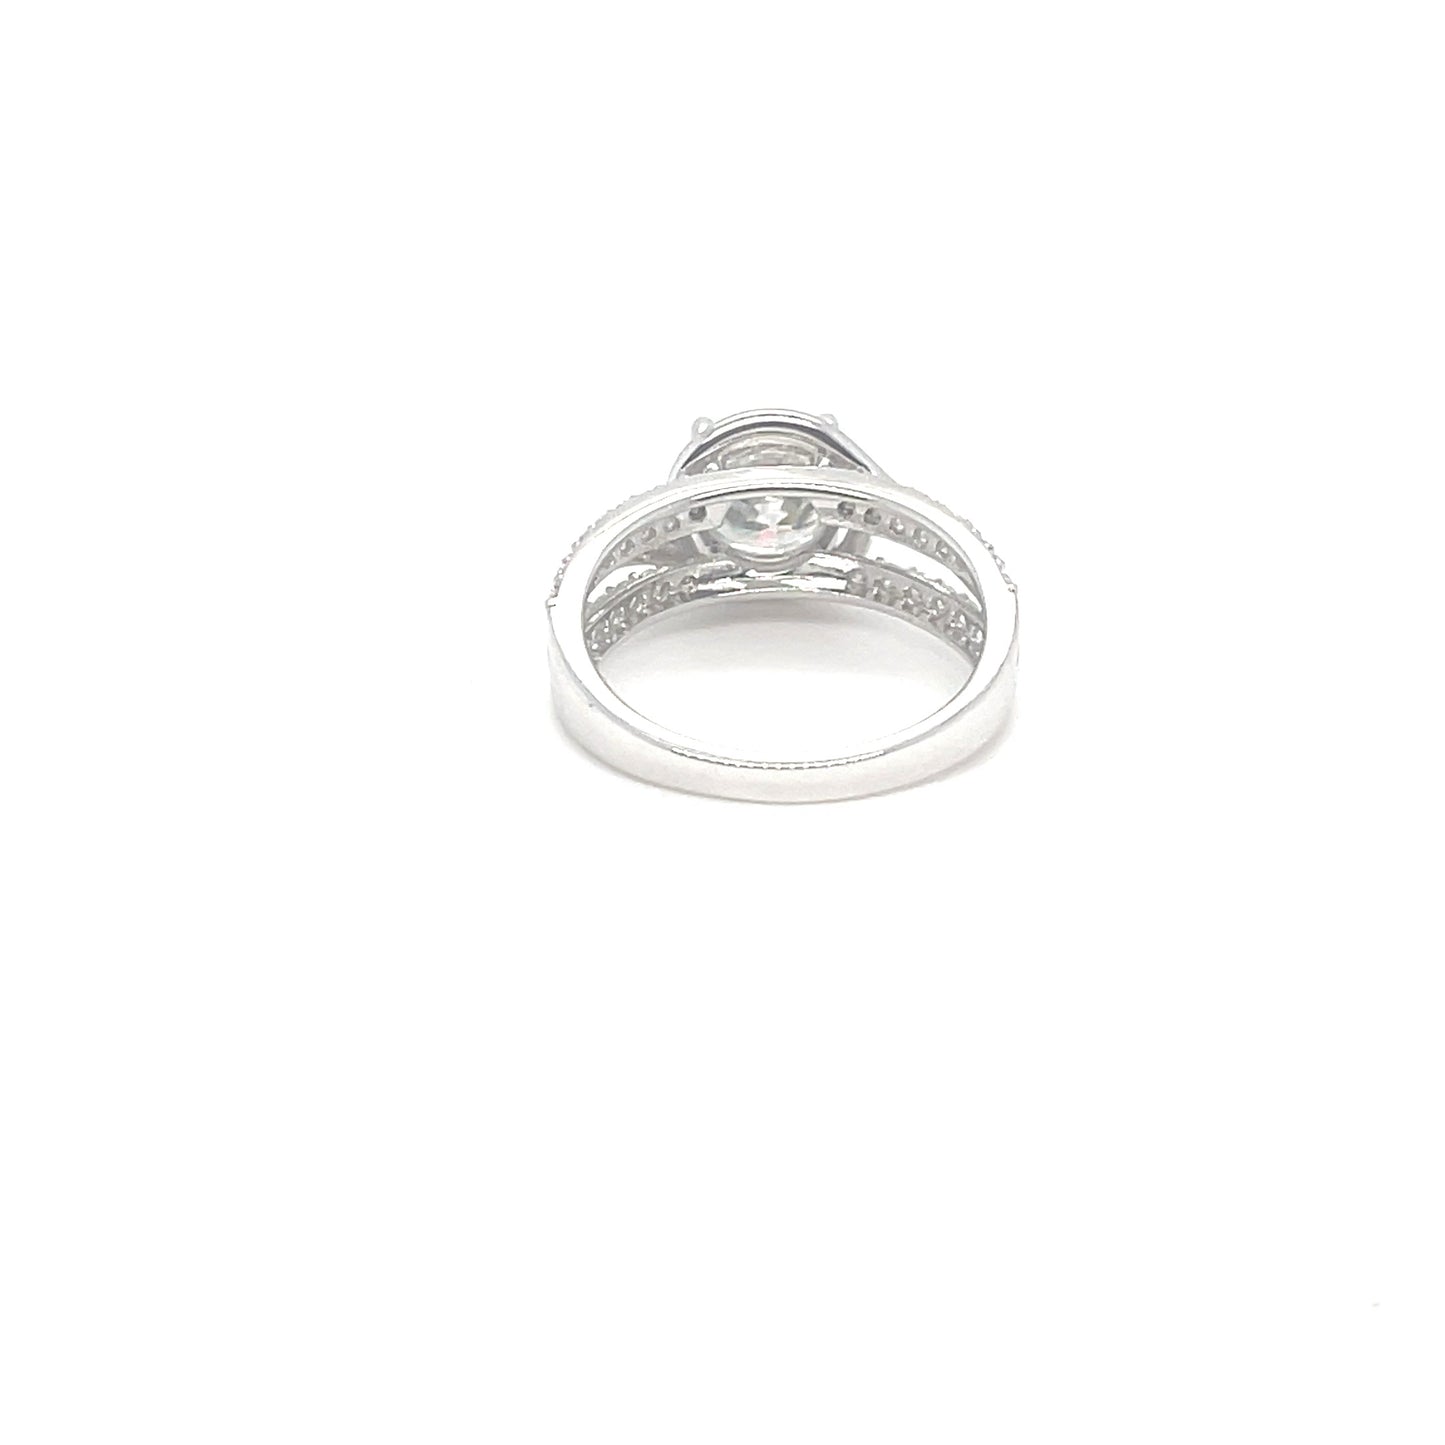 TTT Double Band SS Ring w/2 CT Round Stone & Moissanite Gemstone Highlights.